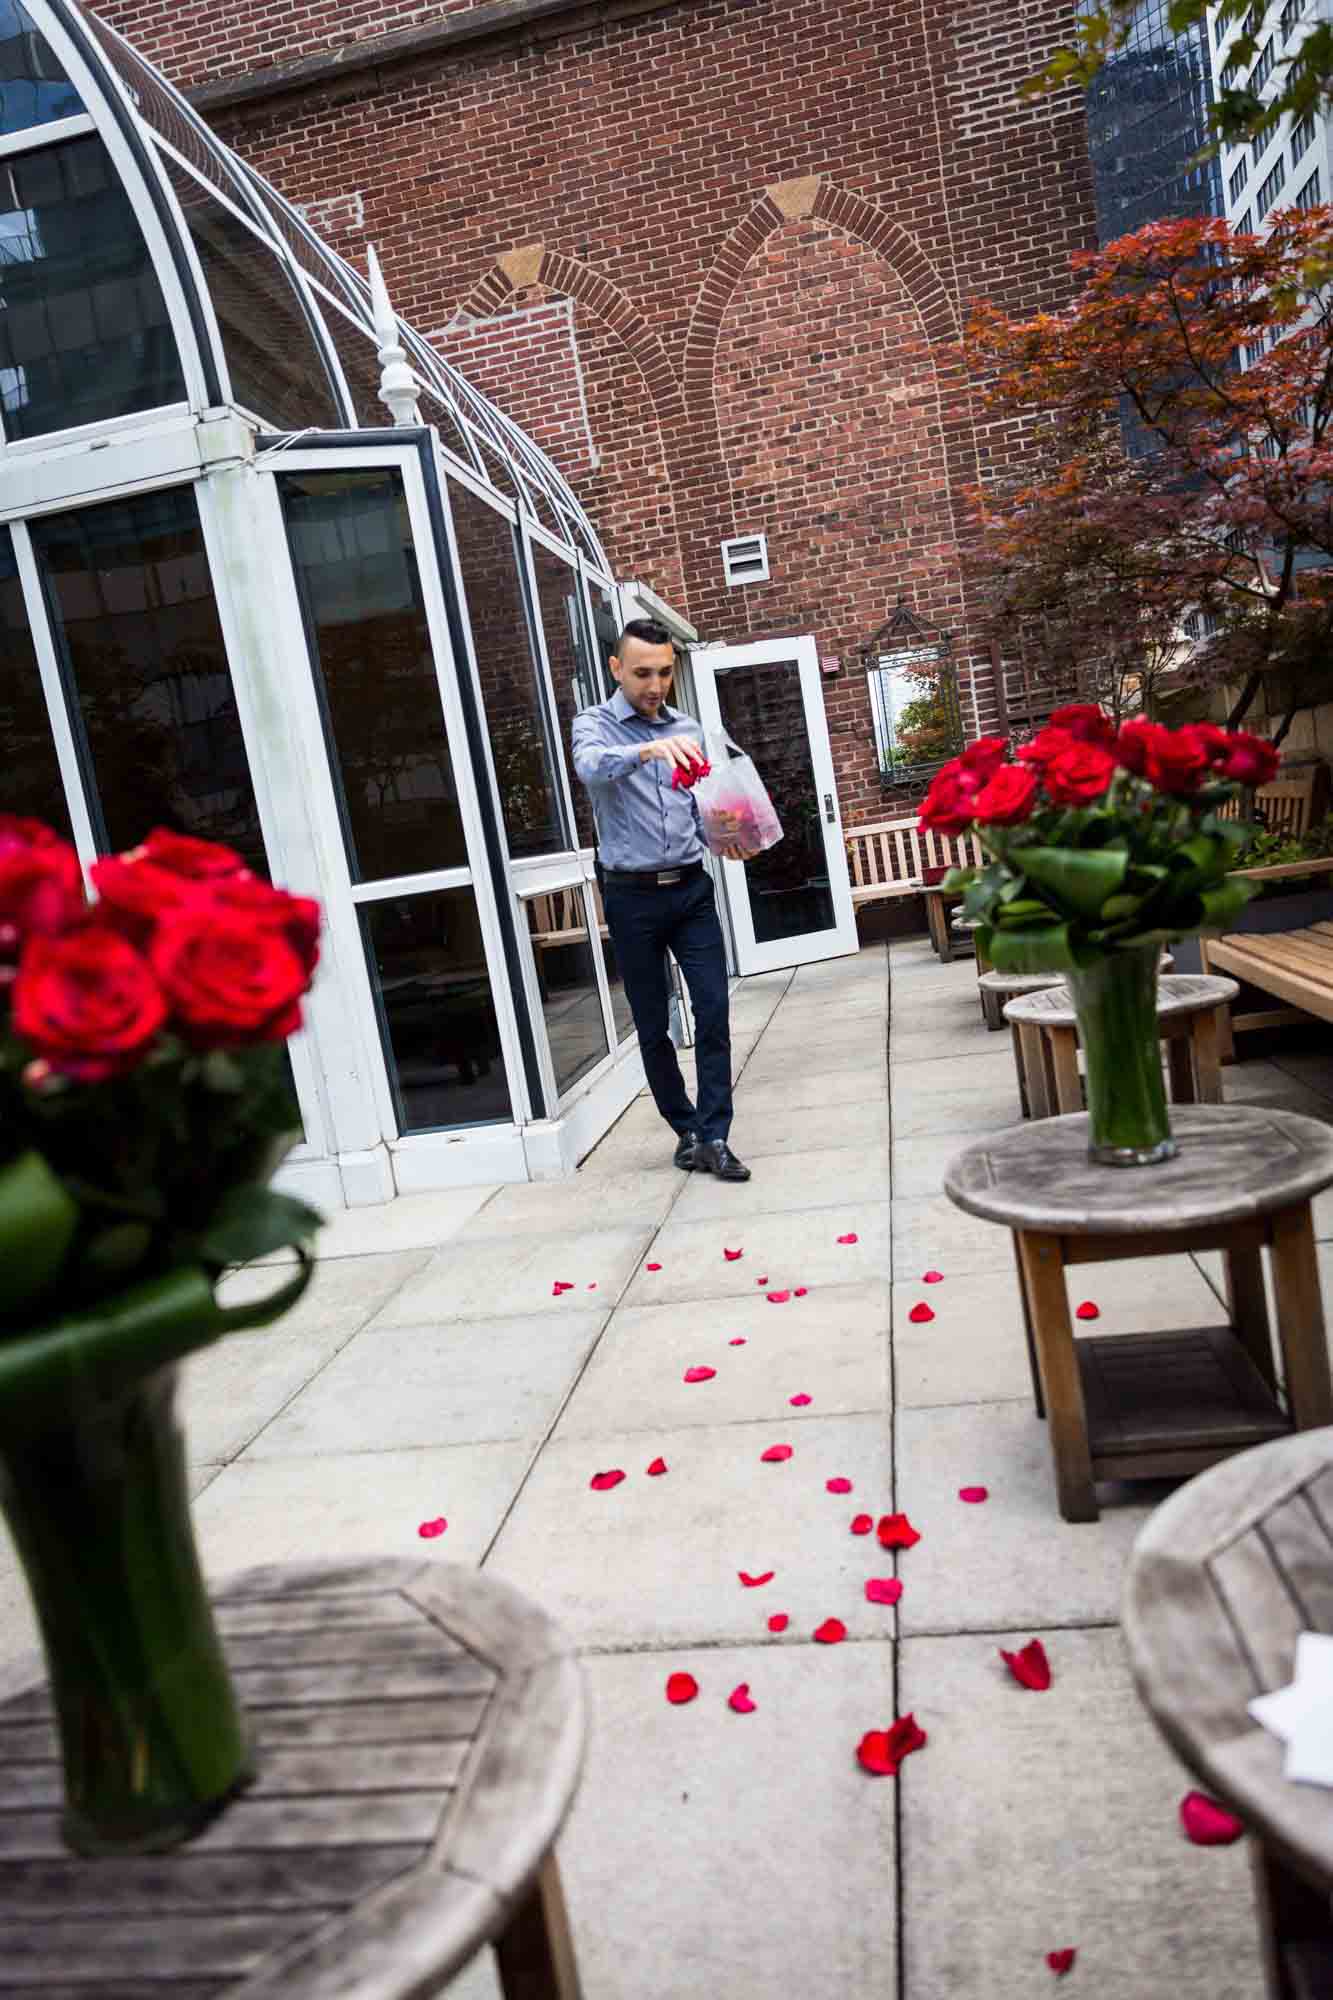 Man distributing red rose petals from a bag on a patio at the Library Hotel